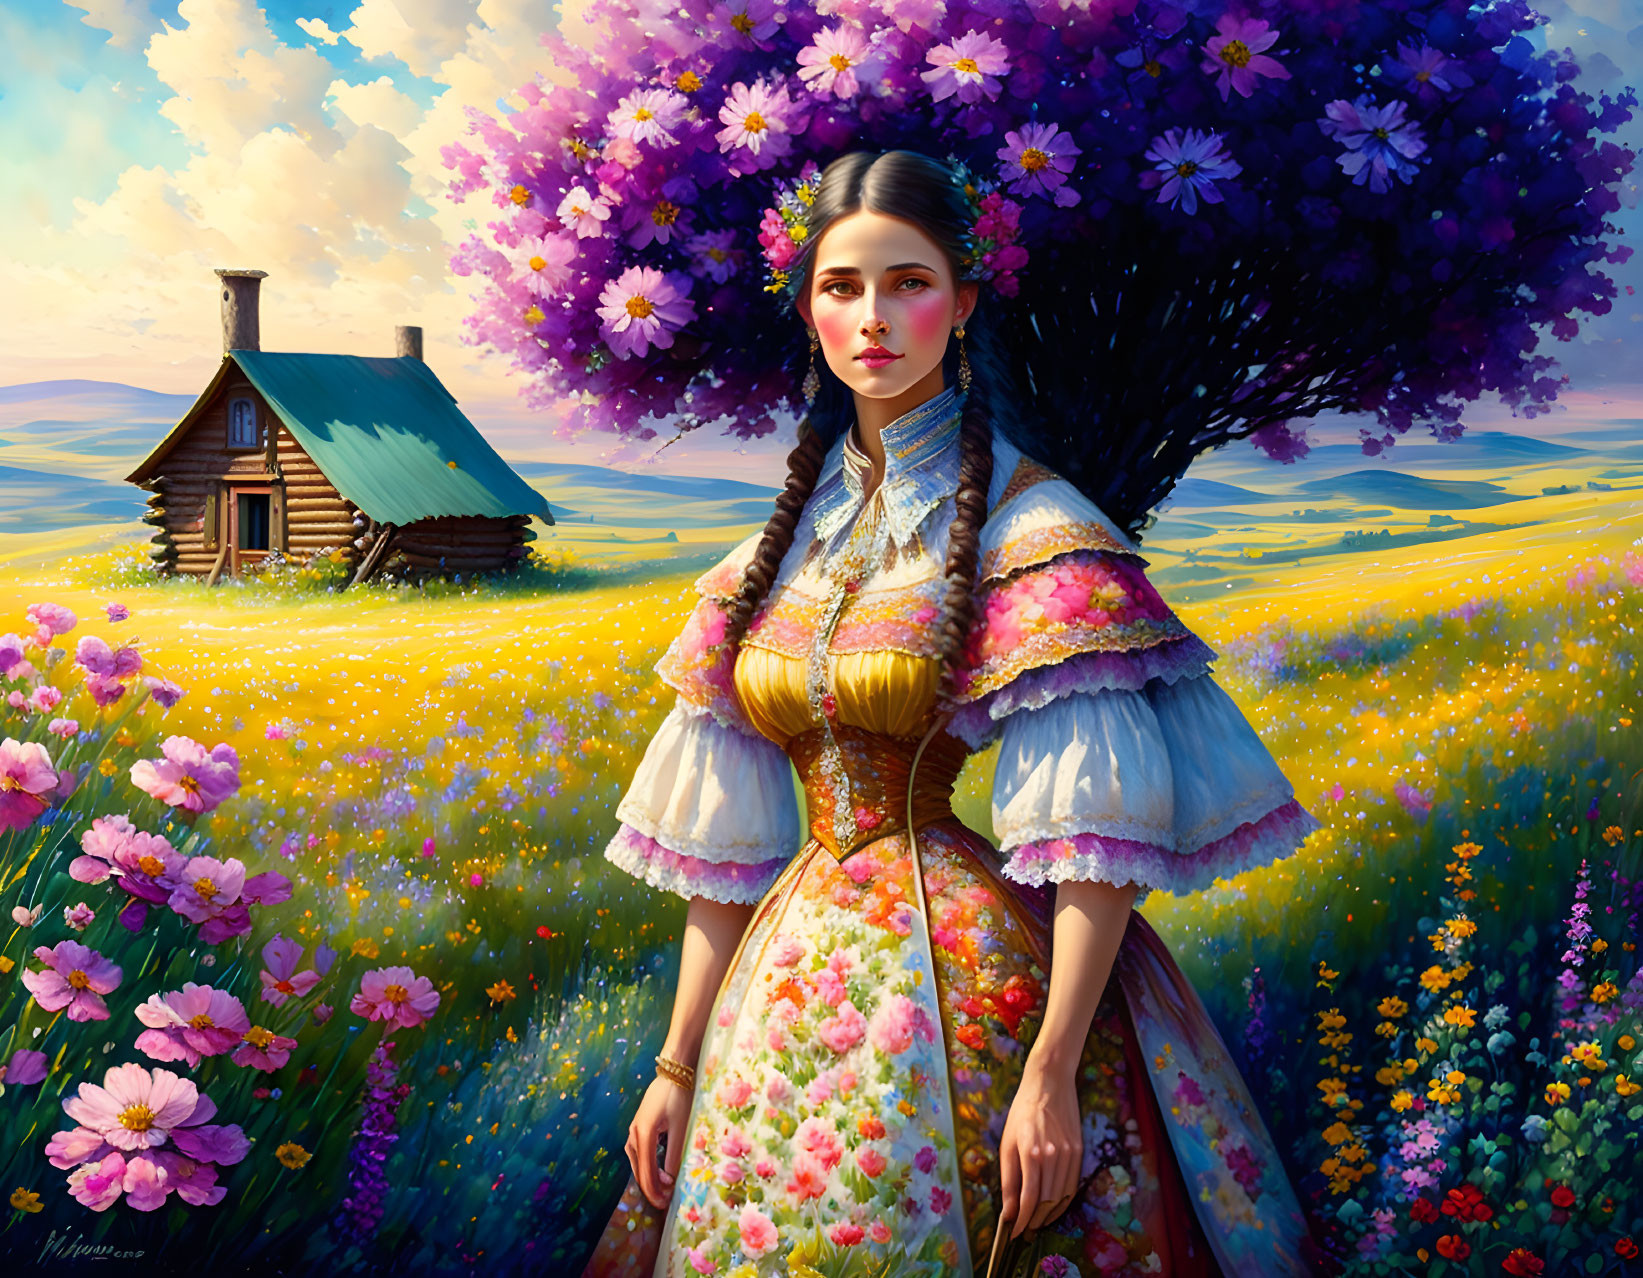 Traditional folk attire woman in vibrant meadow with flowers and cottage.